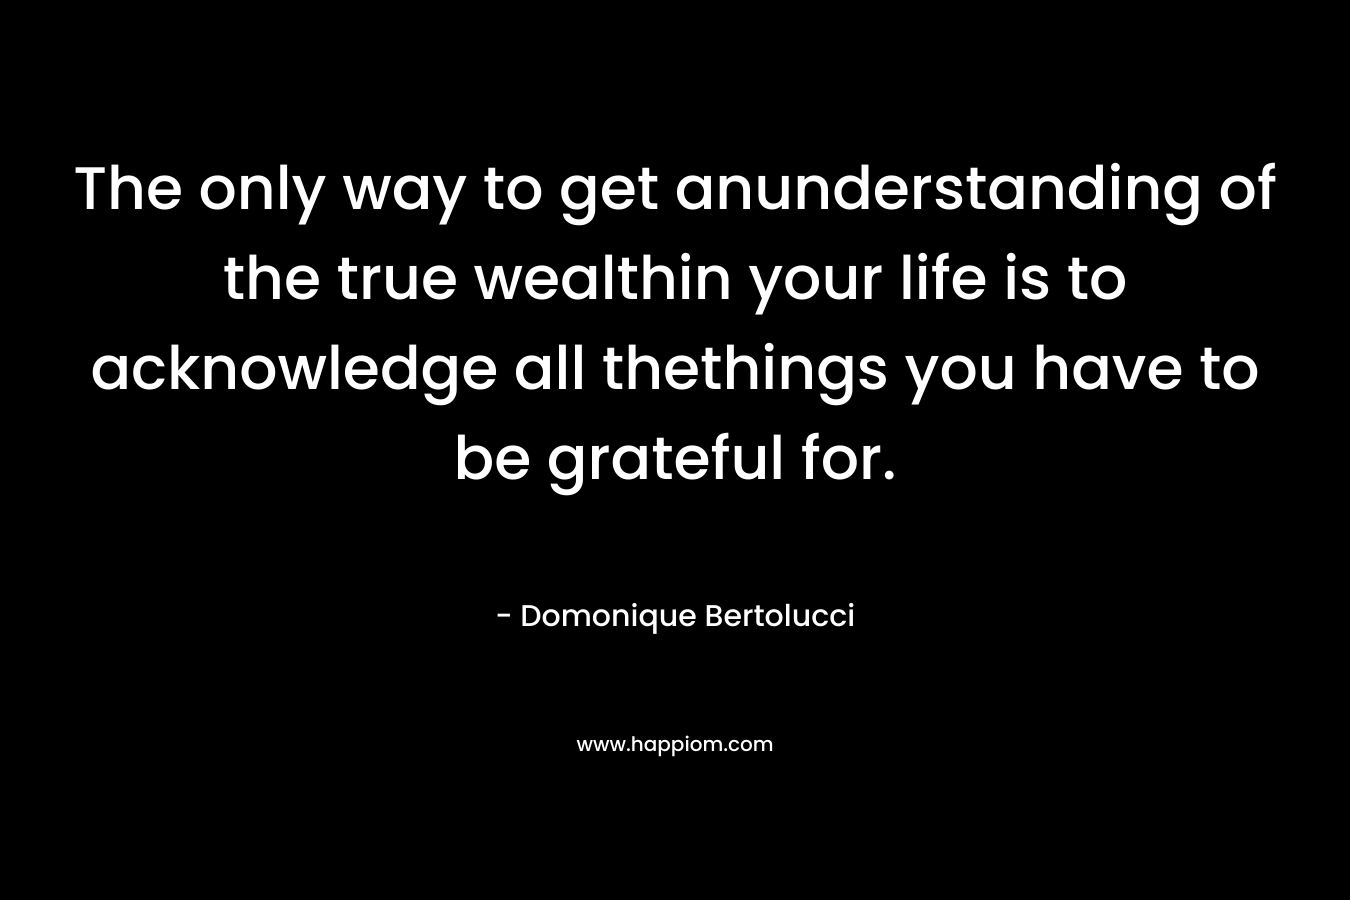 The only way to get anunderstanding of the true wealthin your life is to acknowledge all thethings you have to be grateful for. – Domonique Bertolucci